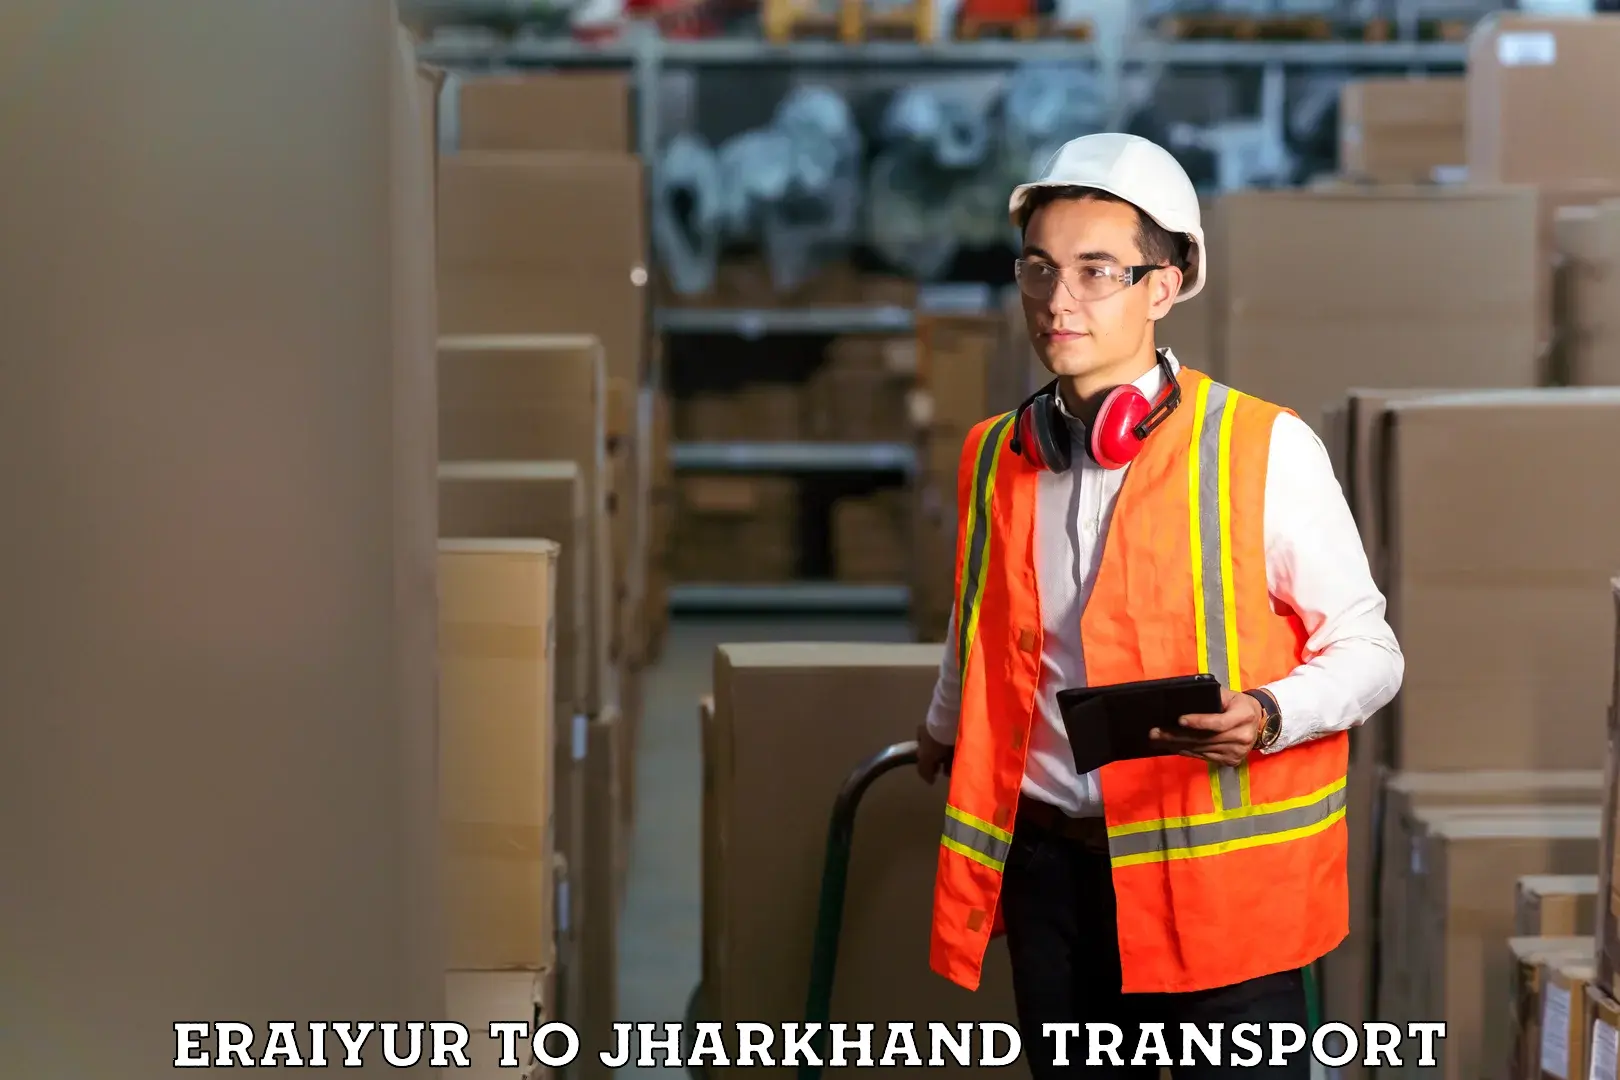 Goods delivery service Eraiyur to Jharkhand